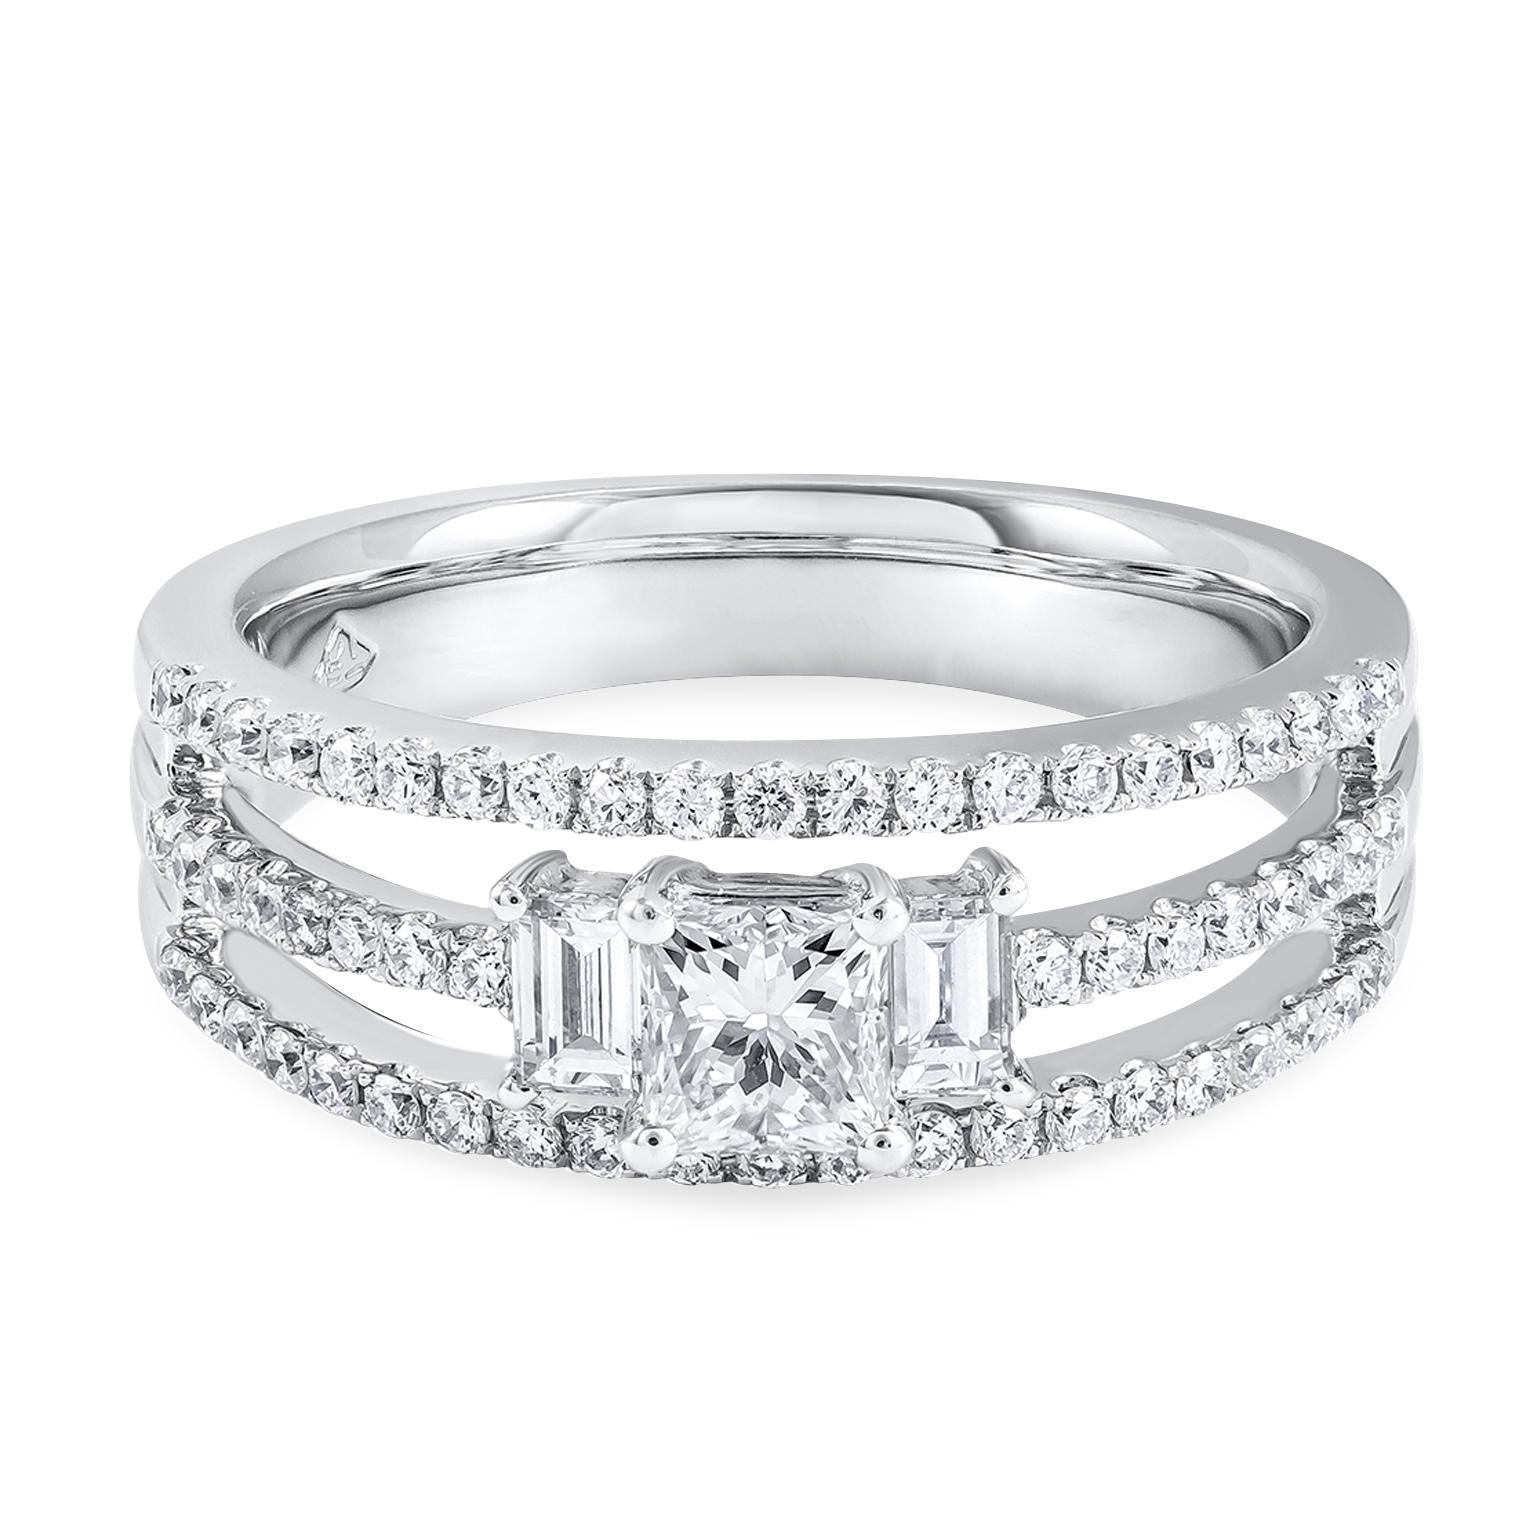 Featuring 0.43 carats princess cut diamond center stone. Flanked by two baguette diamonds weighing 0.19 carats total. Shank made in 18k white gold in a three-row open-work design encrusted with brilliant round diamonds that gradually meet as it goes